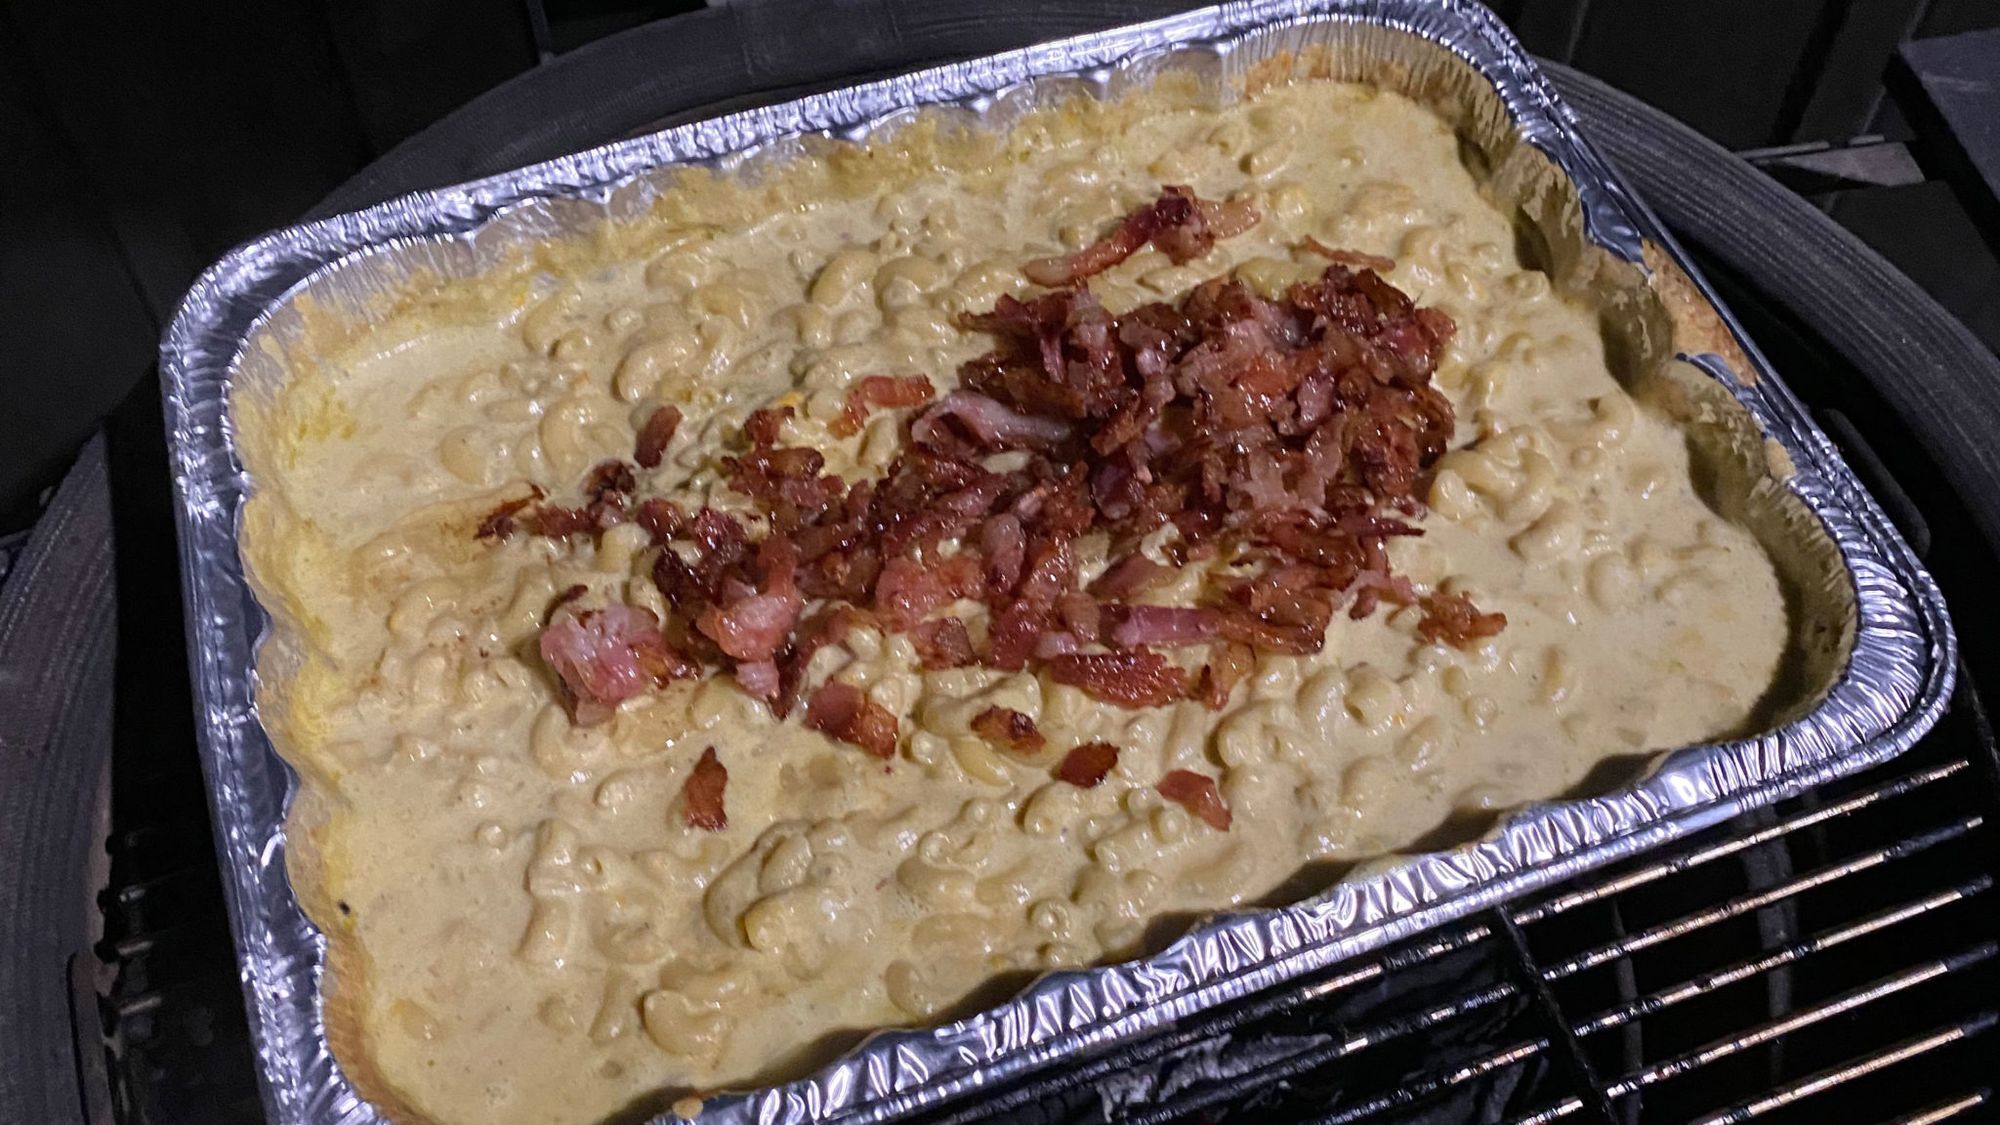 Half-way through the cook – Smoked Mac and Cheese